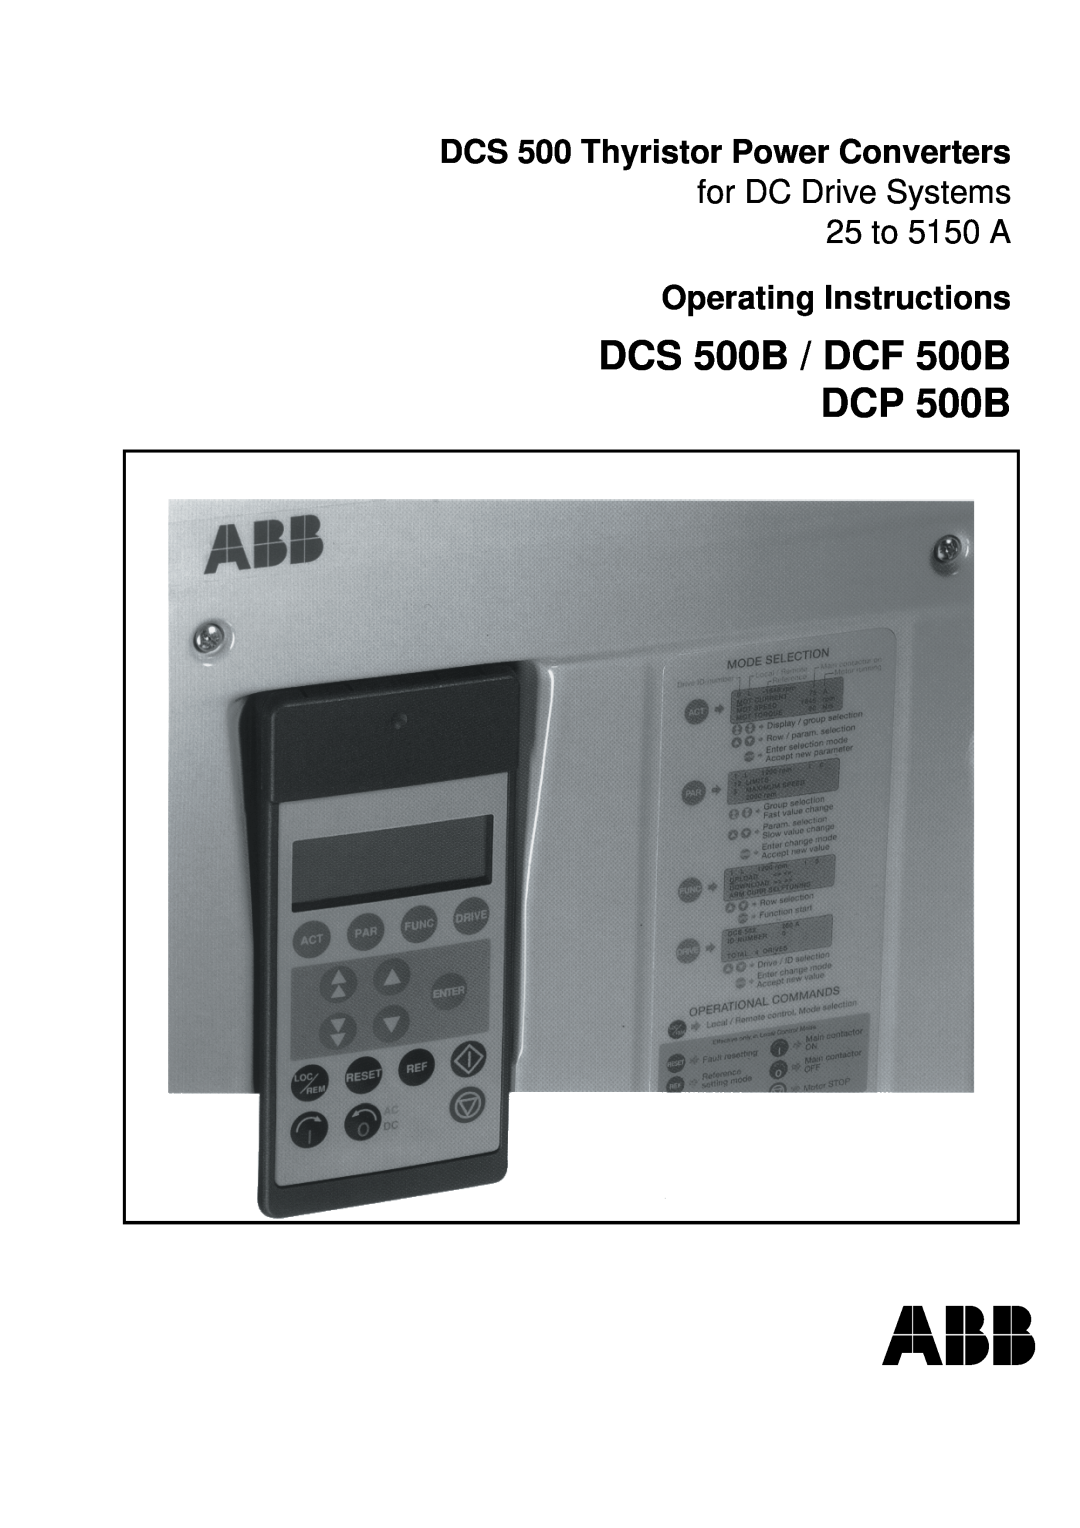 DCS manual DCS 500 Thyristor Power Converters, for DC Drive Systems 25 to 5150 A, Operating Instructions 